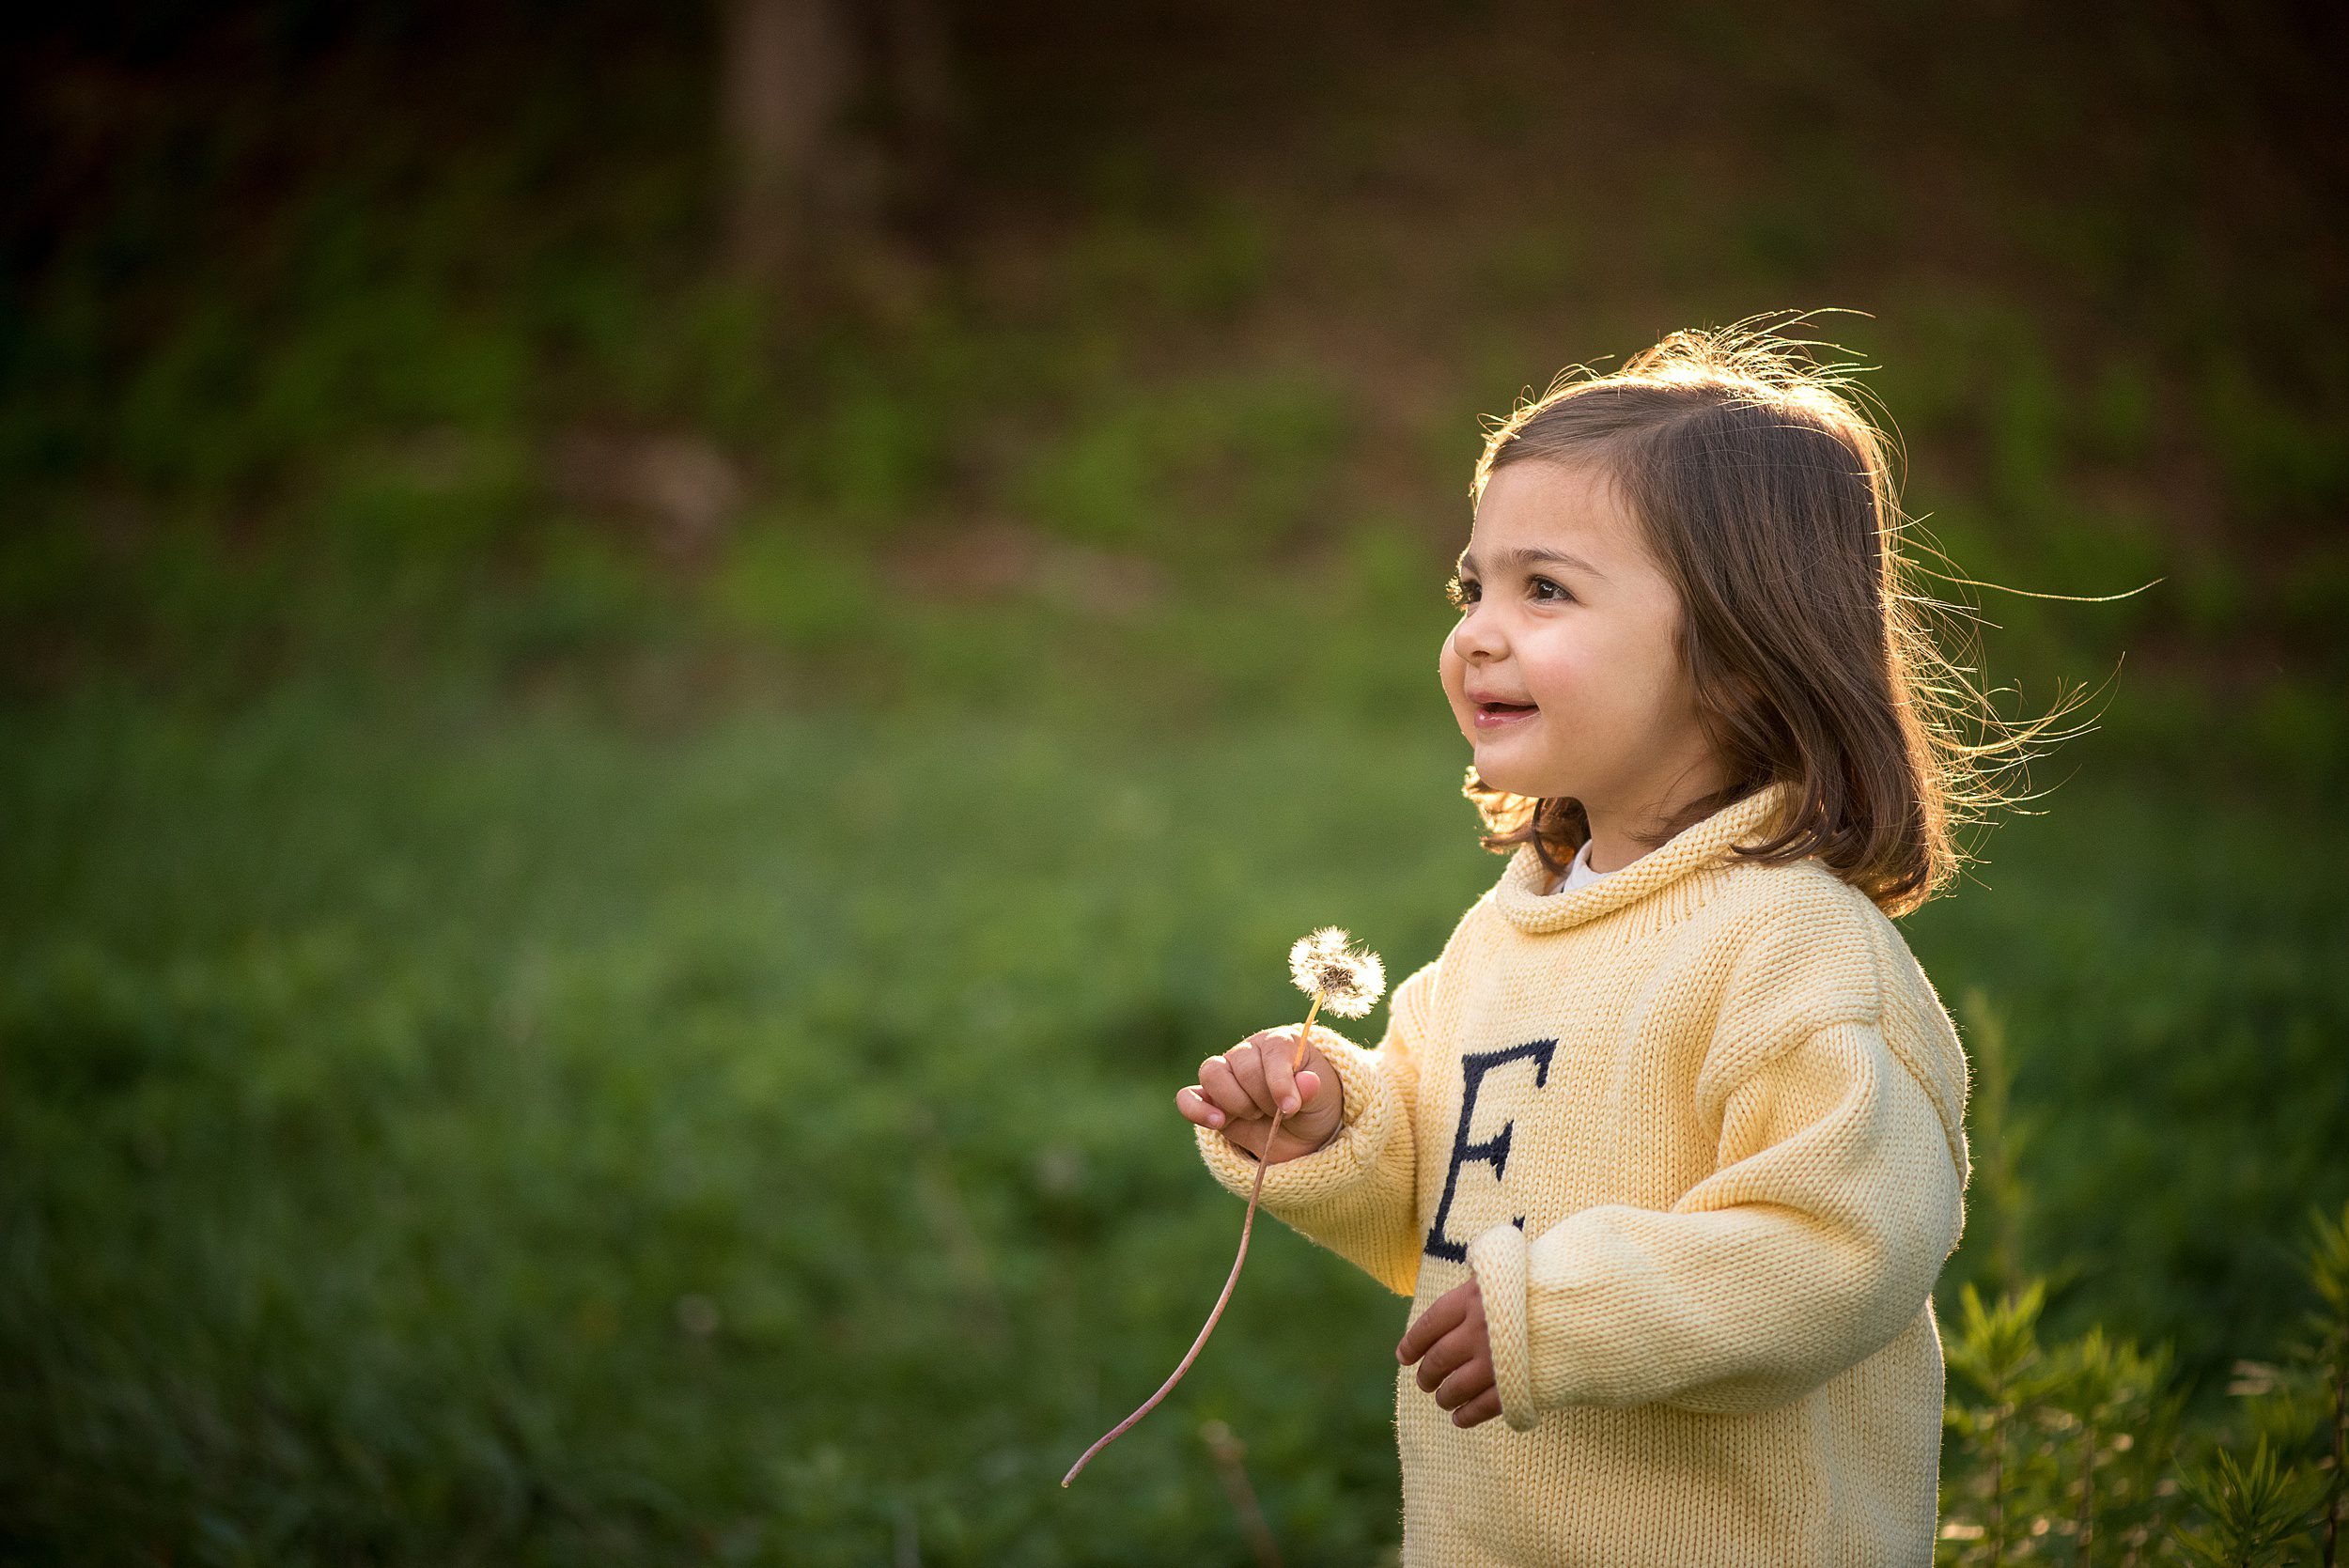 A young toddler girl in a yellow sweater picks a dandelion in one of the best playgrounds in CT at sunset